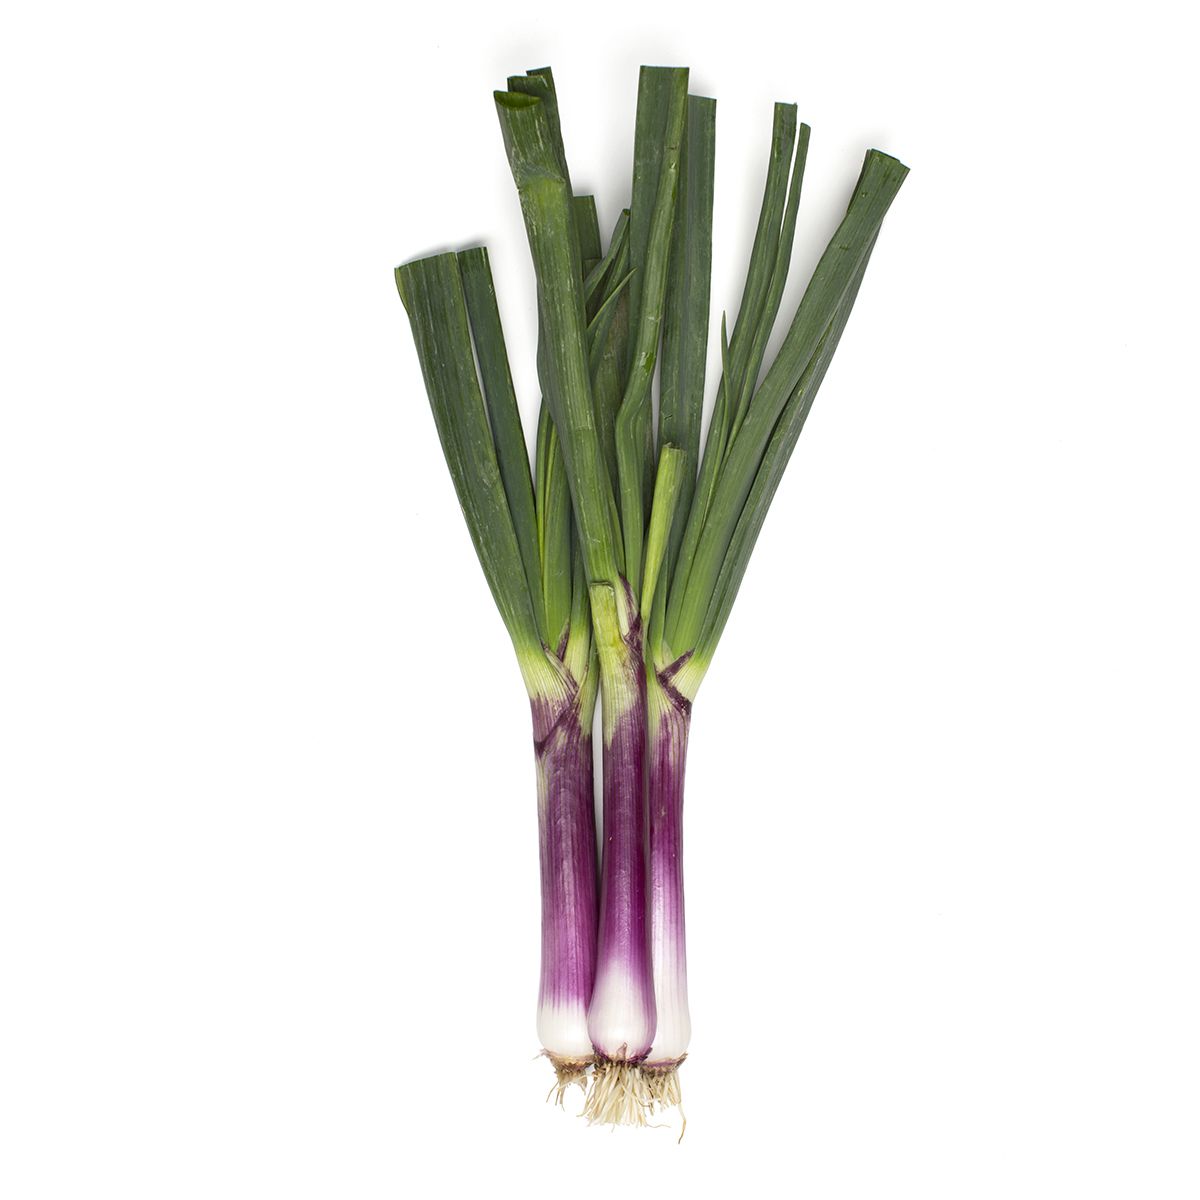 Tesco Finest Red Spring Onion 120G 12ct